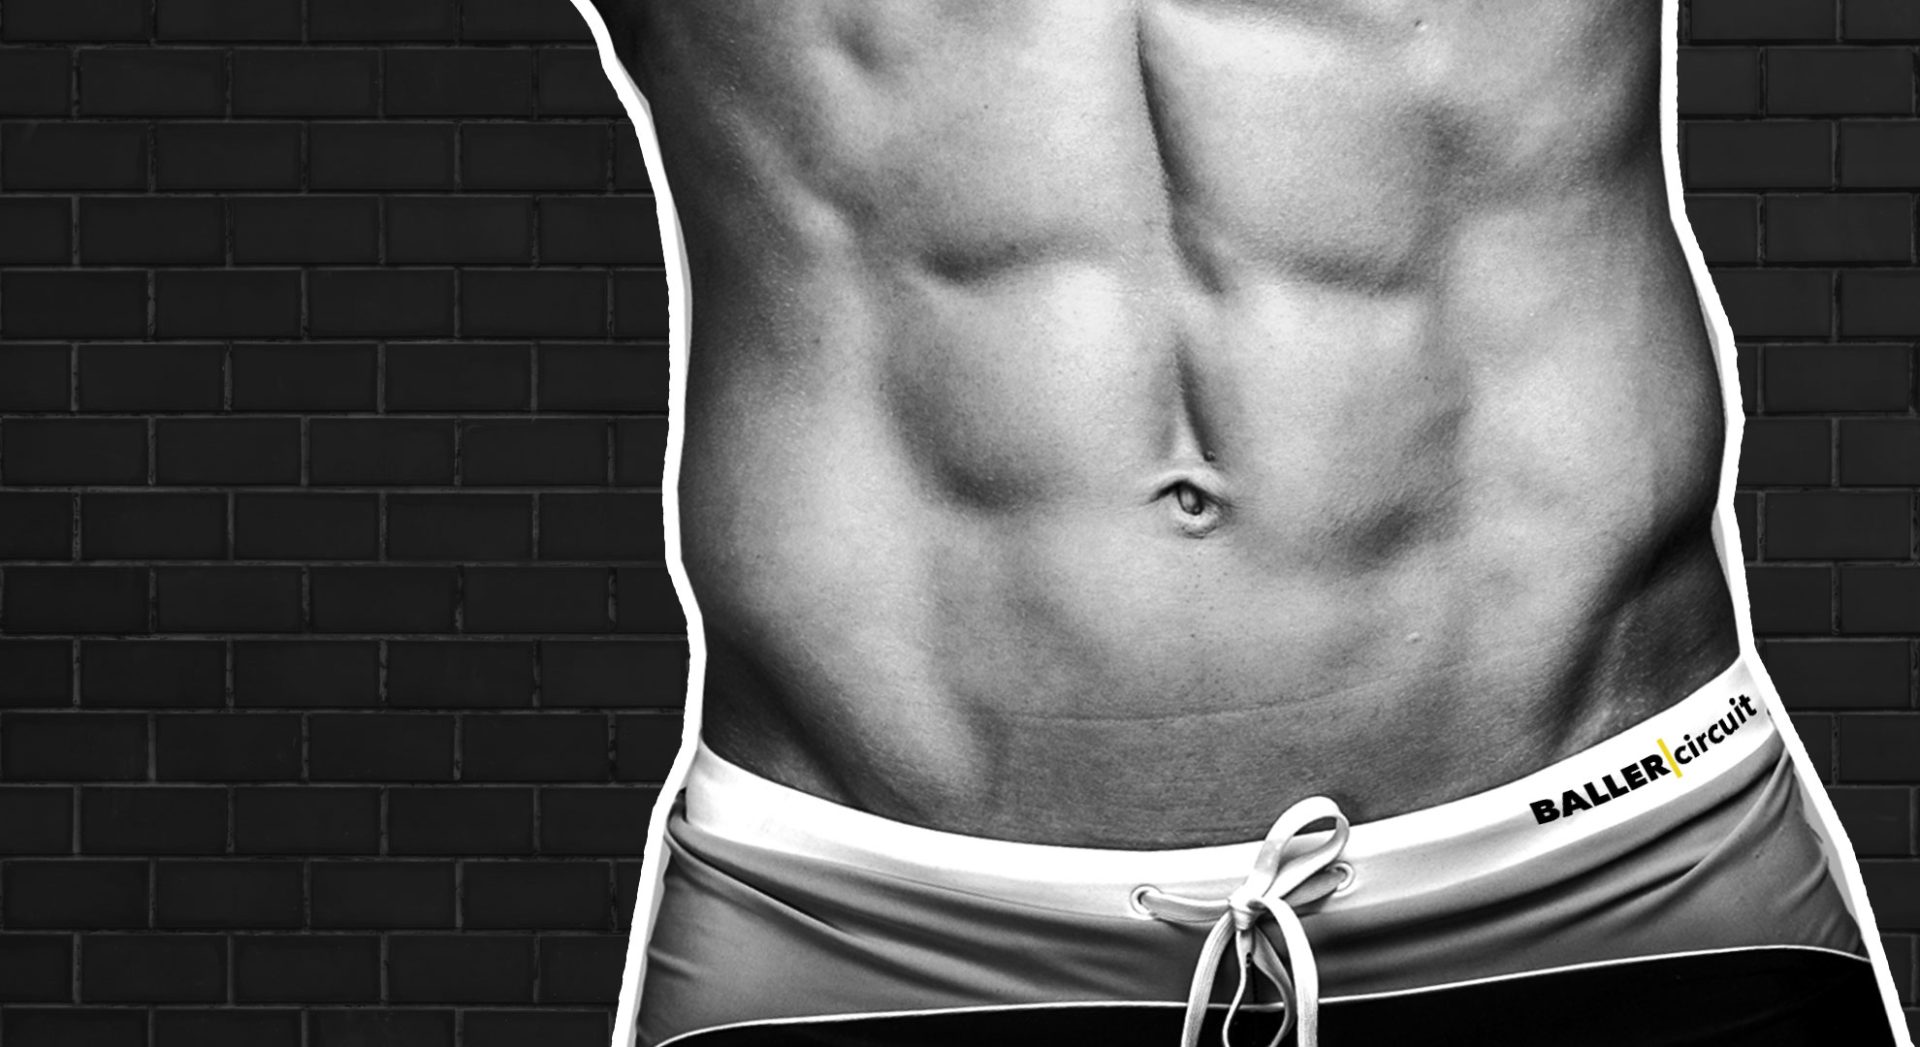 Get V Lines Abs The Ultimate Guide Baller Circuit 3636